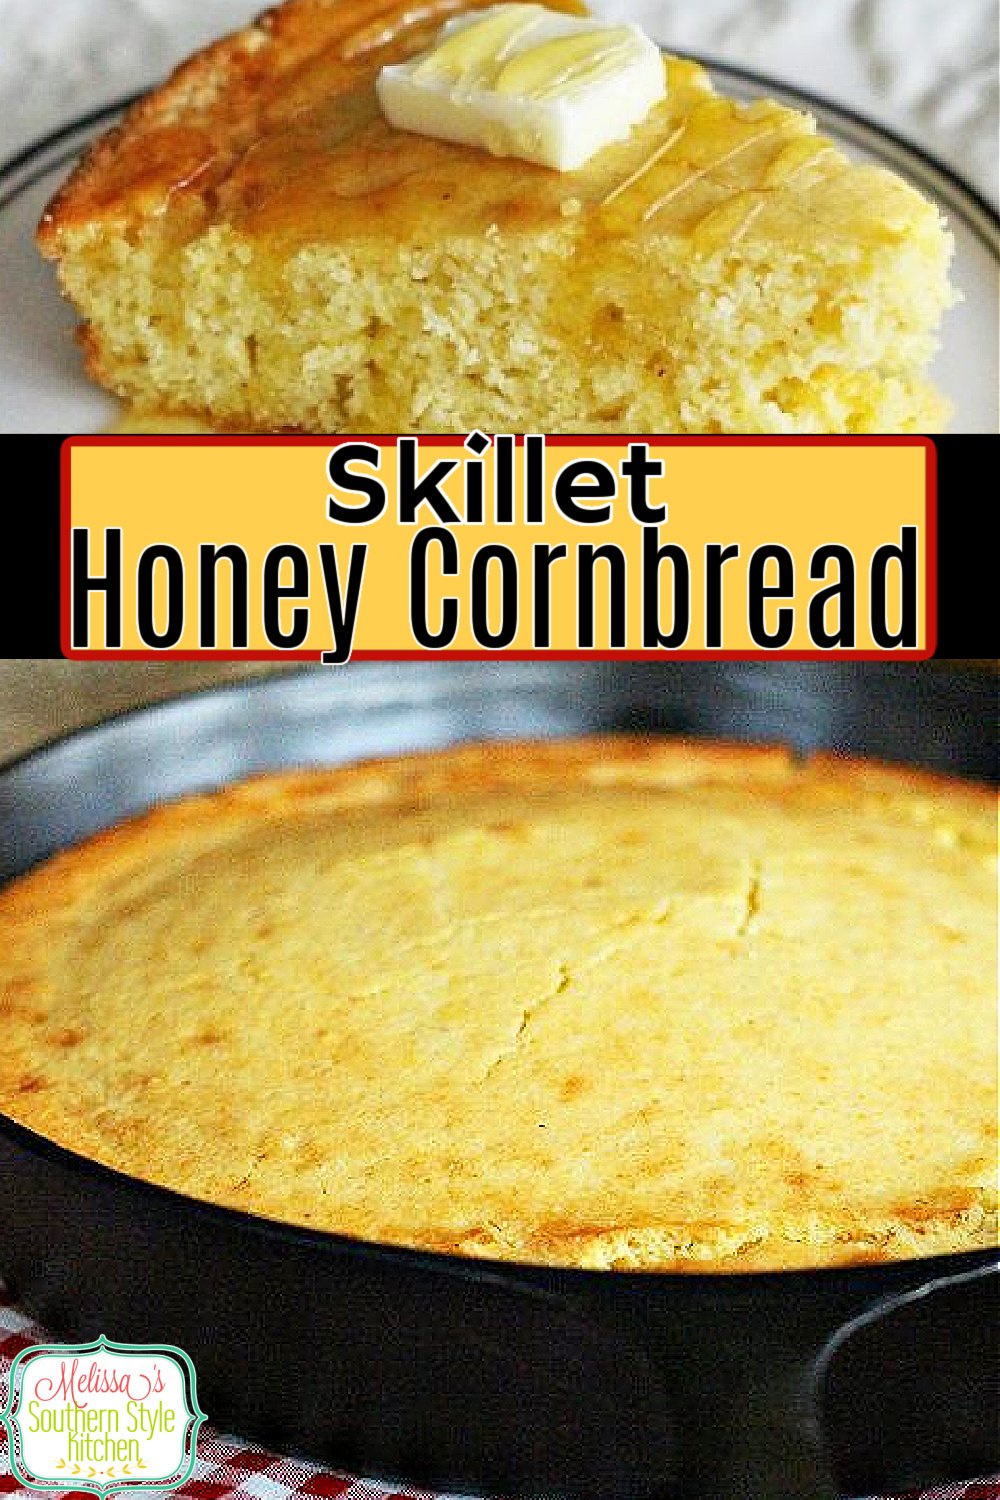 Enjoy this Skillet Honey Cornbread with beans, barbecue, soup, stew and beyond #cornbread #honeycornbread #cornbreadrecipes #breadrecipes #southernfood #southernrecipes #castironcooking #skilletcornbread #dinnerideas #dinner via @melissasssk